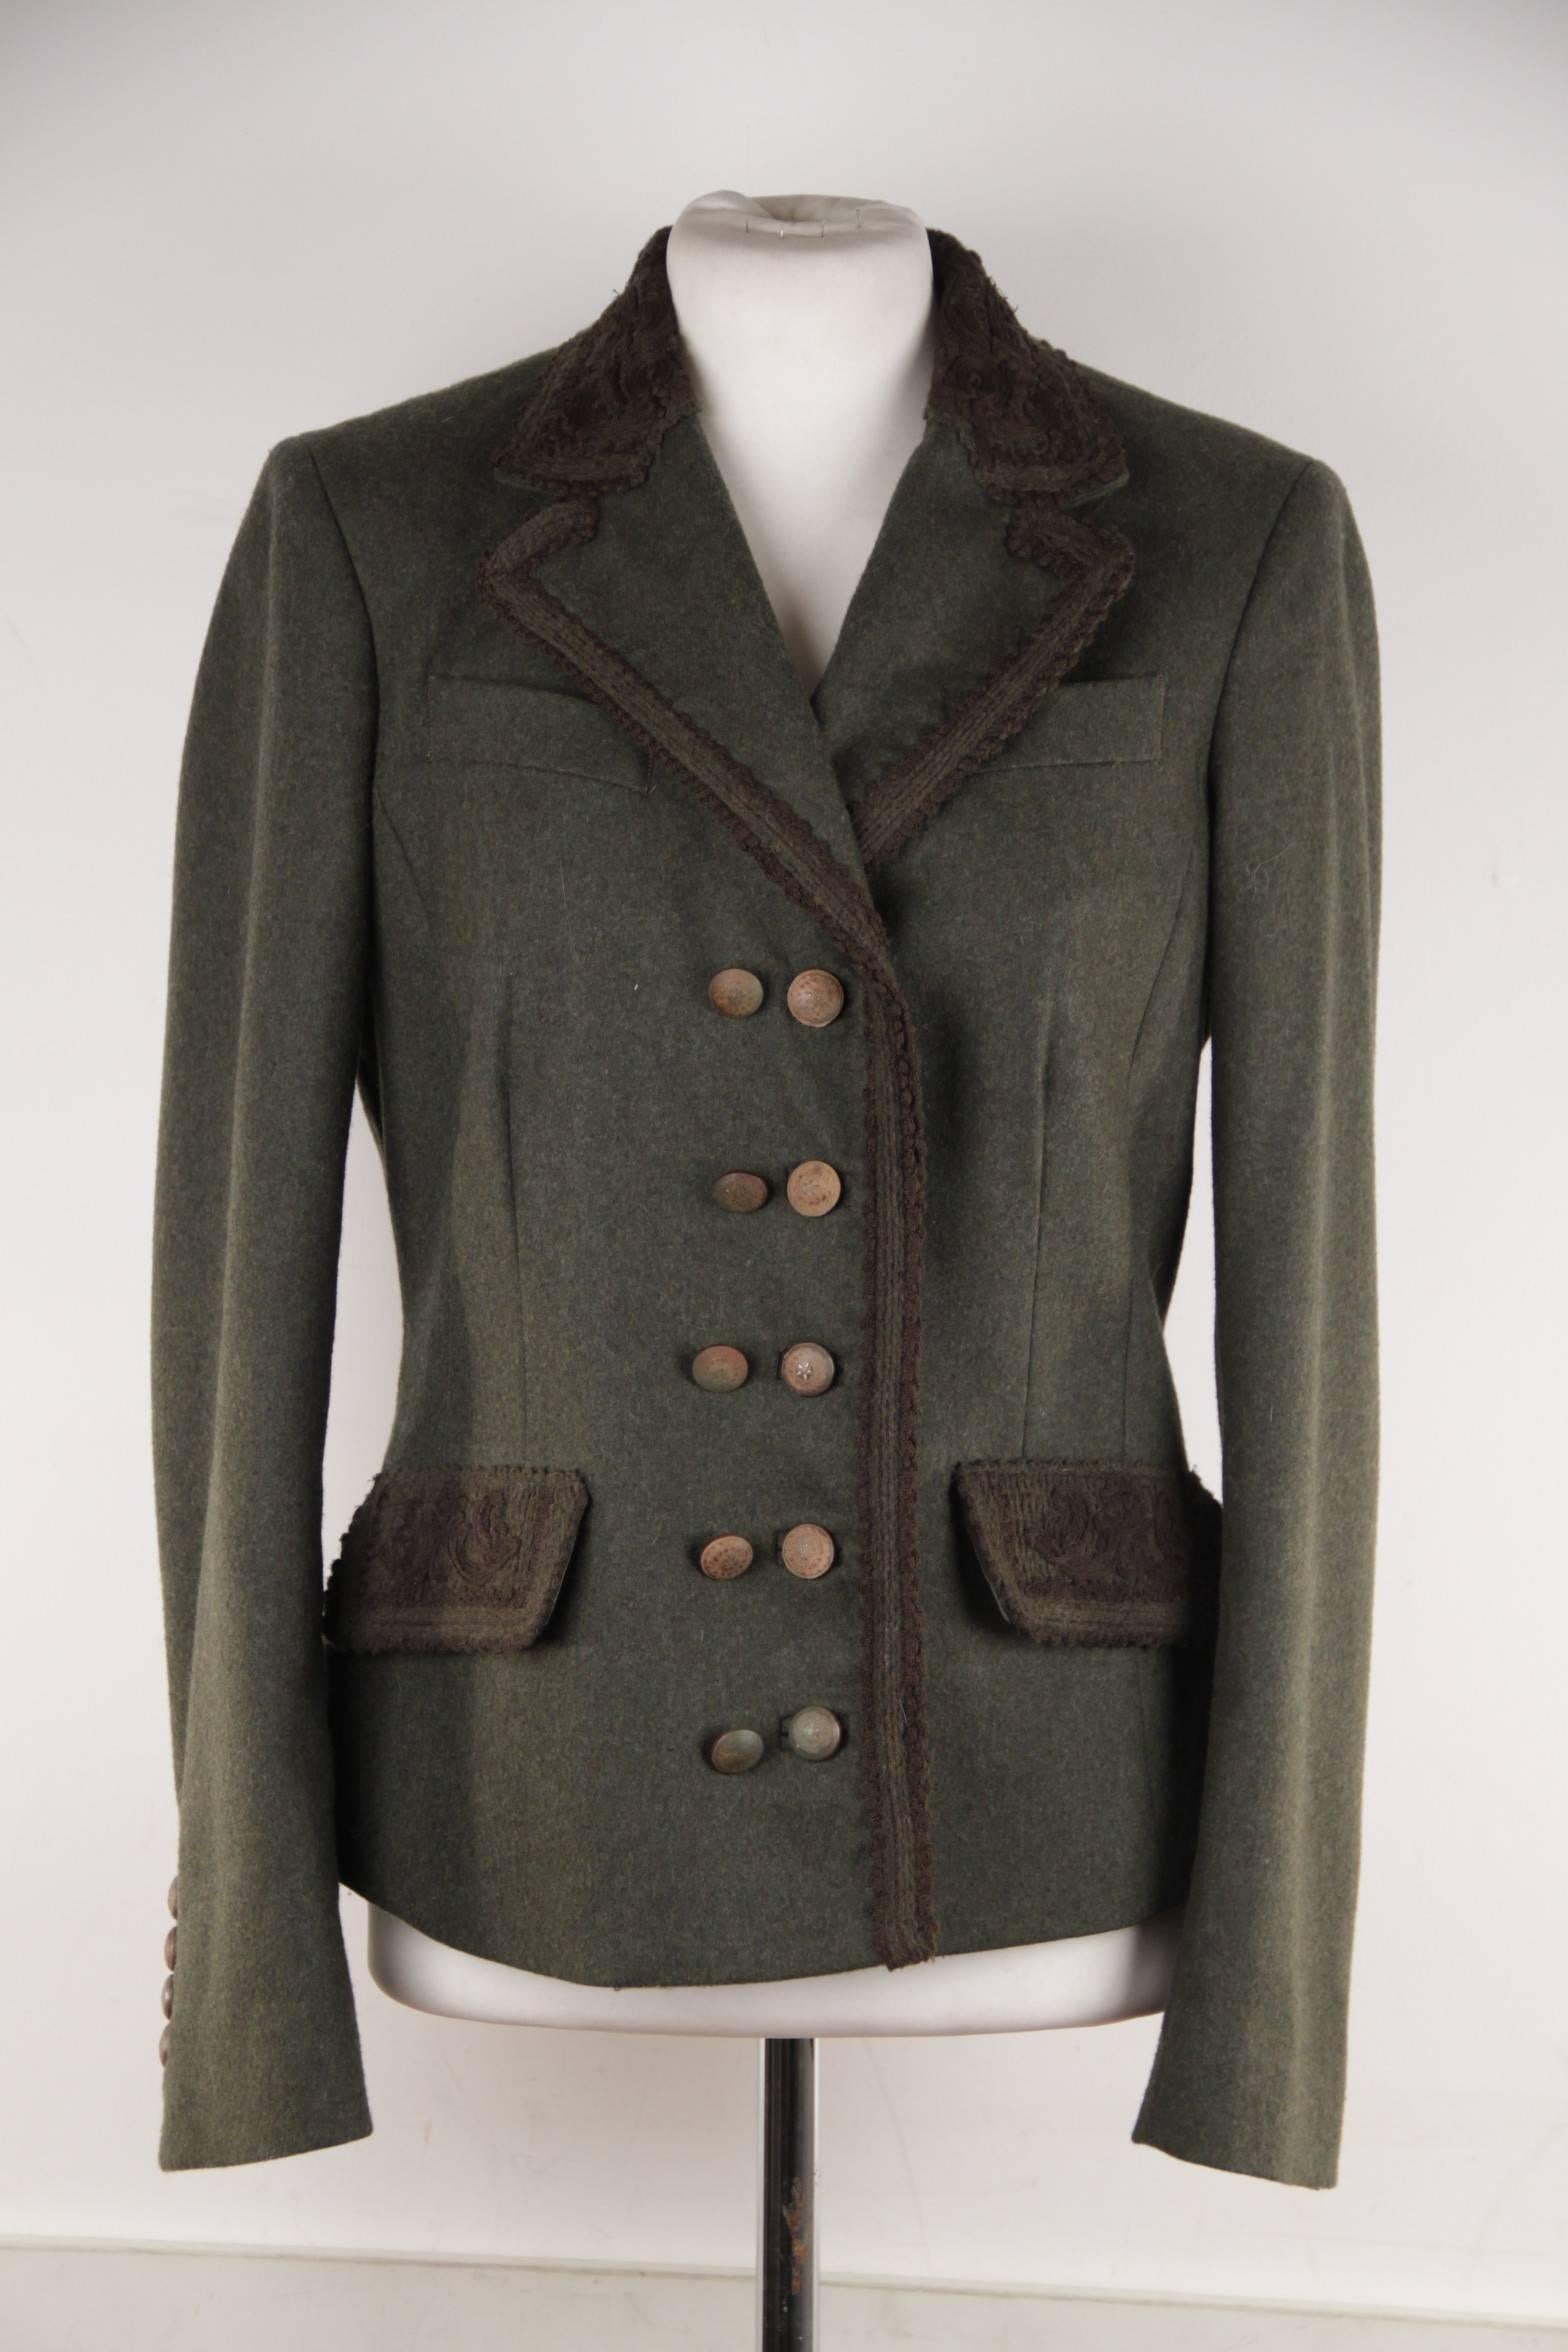 Women's ERMANNO SCERVINO Military Green LODEN Wool Jacket w/ Embroidery SZ 44 IT